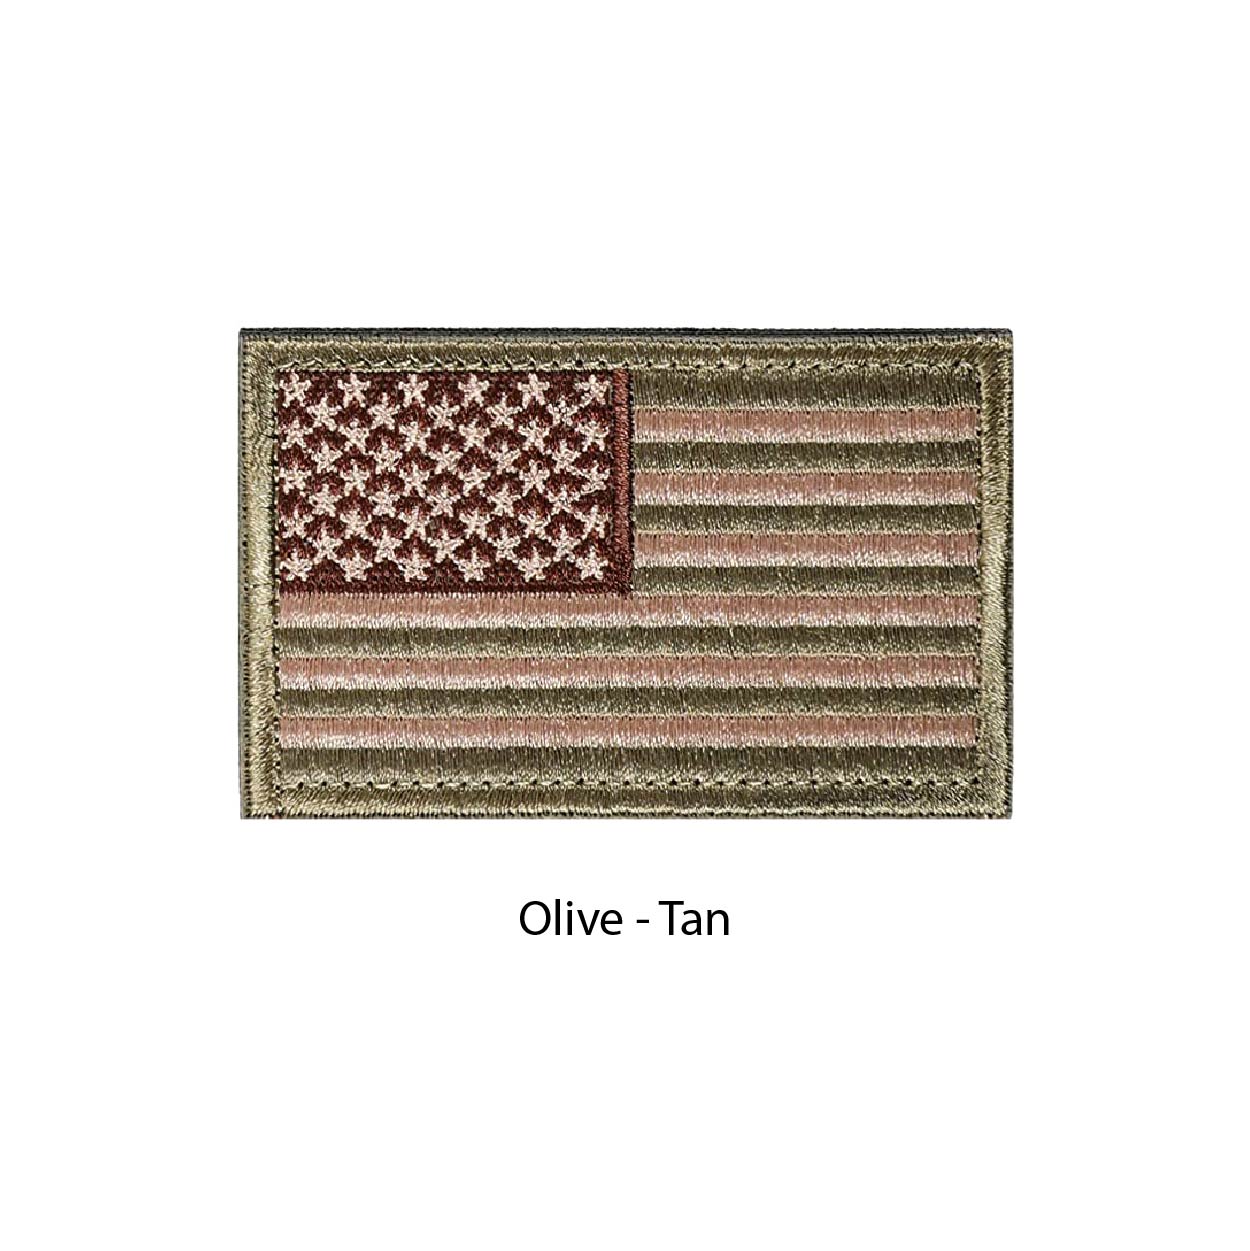 Jupiter Gear Tactical USA Flag Patch with Detachable Backing - Grey